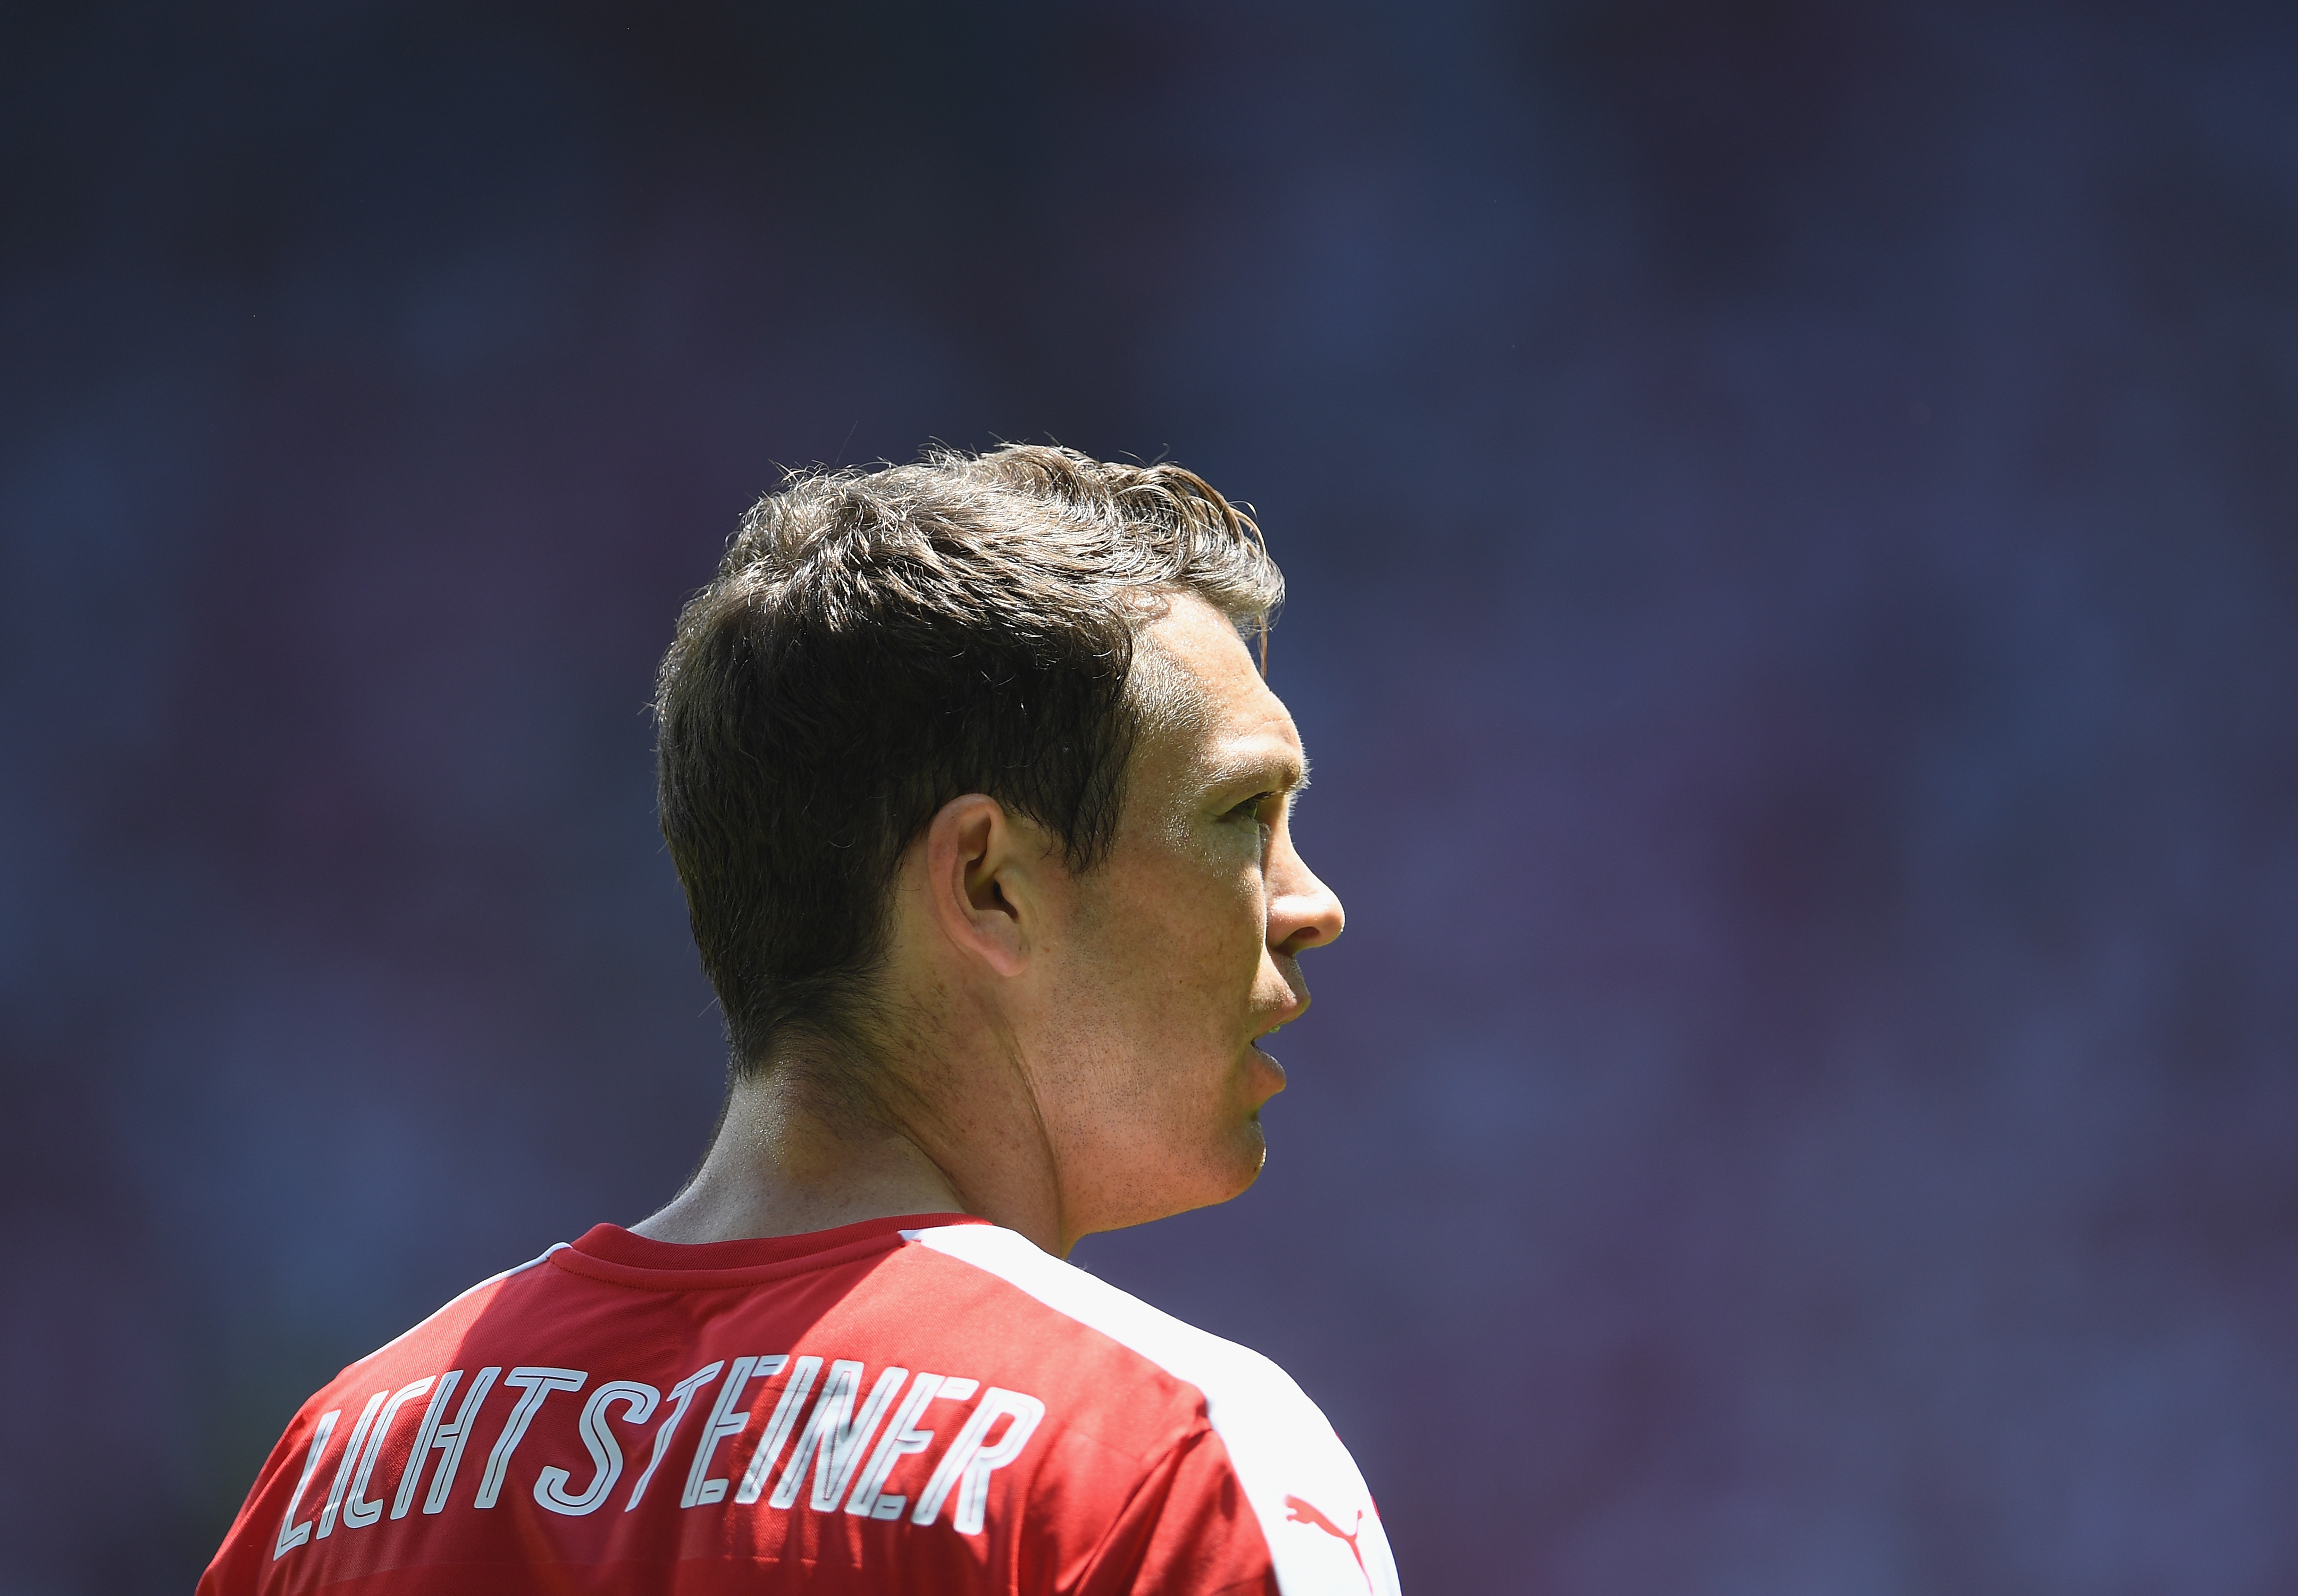 SAINT-ETIENNE, FRANCE - JUNE 25: Stephan Lichtsteiner of Switzerland looks on during the UEFA Euro 2016 Round of 16 match between Switzerland and Poland at Stade Geoffroy-Guichard on June 25, 2016 in Saint-Etienne, France.  (Photo by Laurence Griffiths/Getty Images)